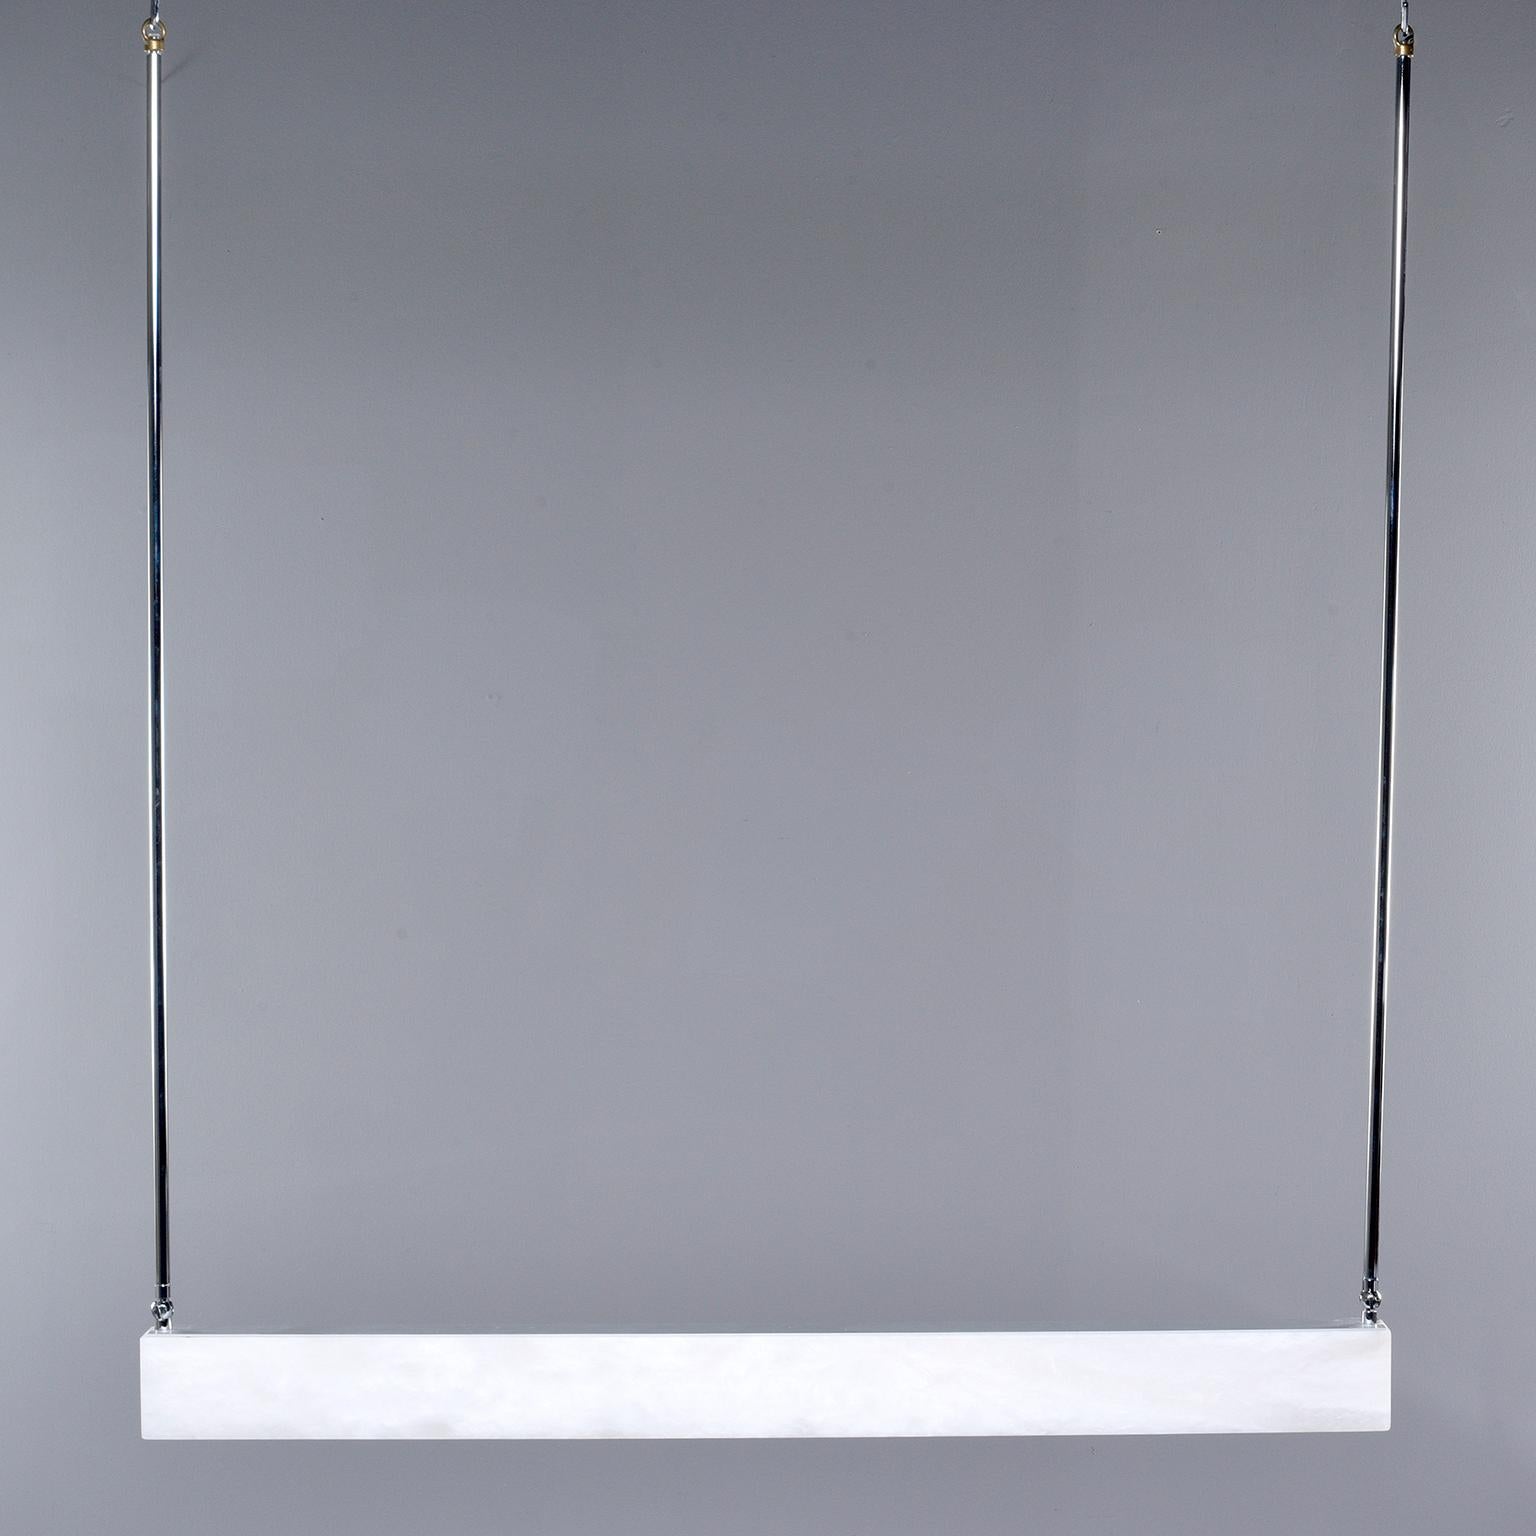 New Italian alabaster rectangular light with chrome fittings

Custom made for us by Italian artisans, this fixture features a sleek rectangular alabaster bar with LED lights and chrome fittings that can be hung in a triangular configuration or